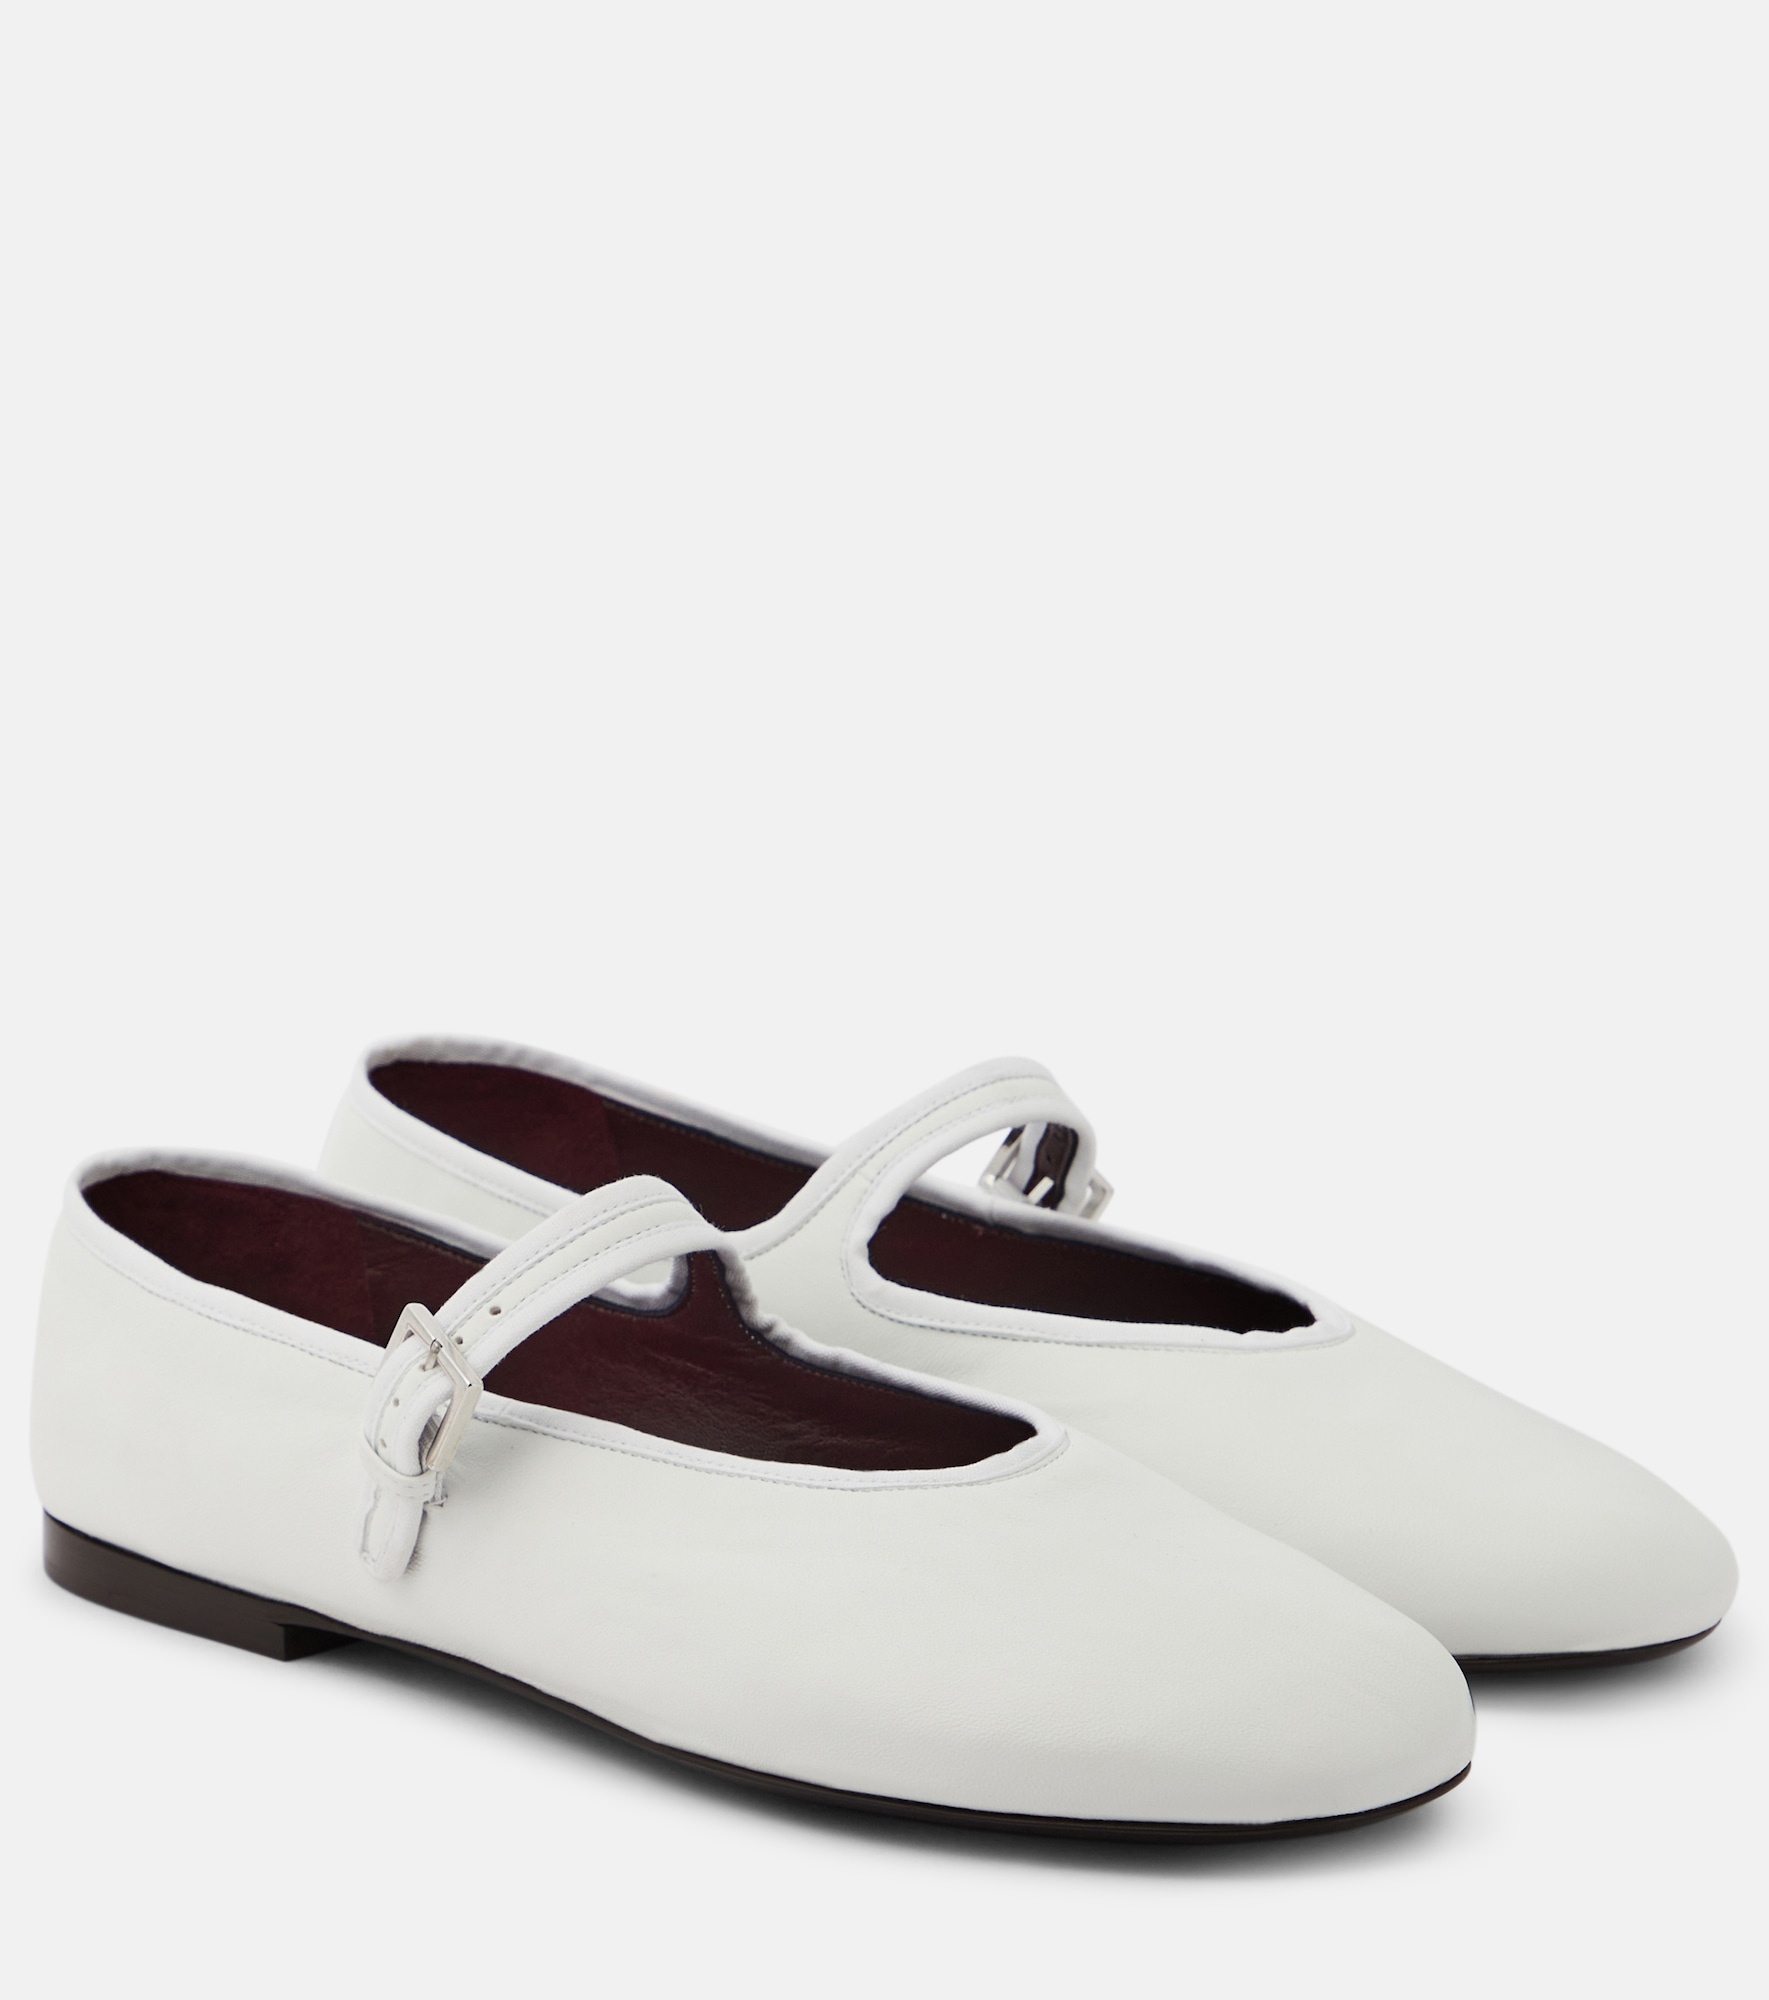 Leather Mary Jane ballet flats - 1